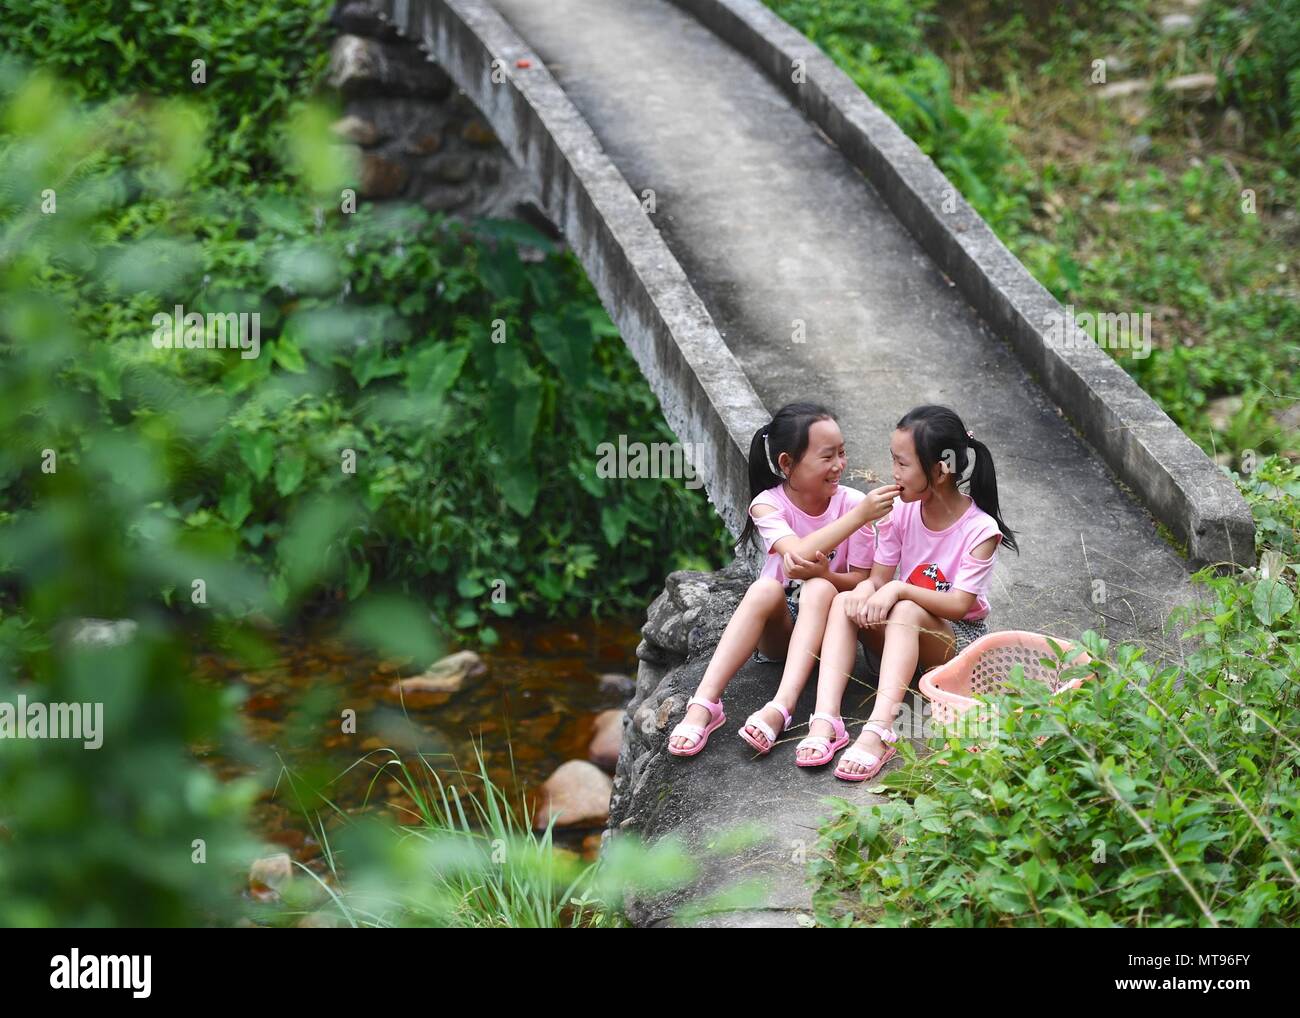 Nanchang, China's Jiangxi Province. 23rd May, 2018. Eleven-year-old Pan Xuejing (L) and her twin sister Pan Xueying take a rest in Suolong Village of Yudu County, east China's Jiangxi Province, May 23, 2018. With about 1,000 residents, Suolong Village has 29 cases of multiple births, a high rate considering the modest population size. Credit: Hu Chenhuan/Xinhua/Alamy Live News Stock Photo